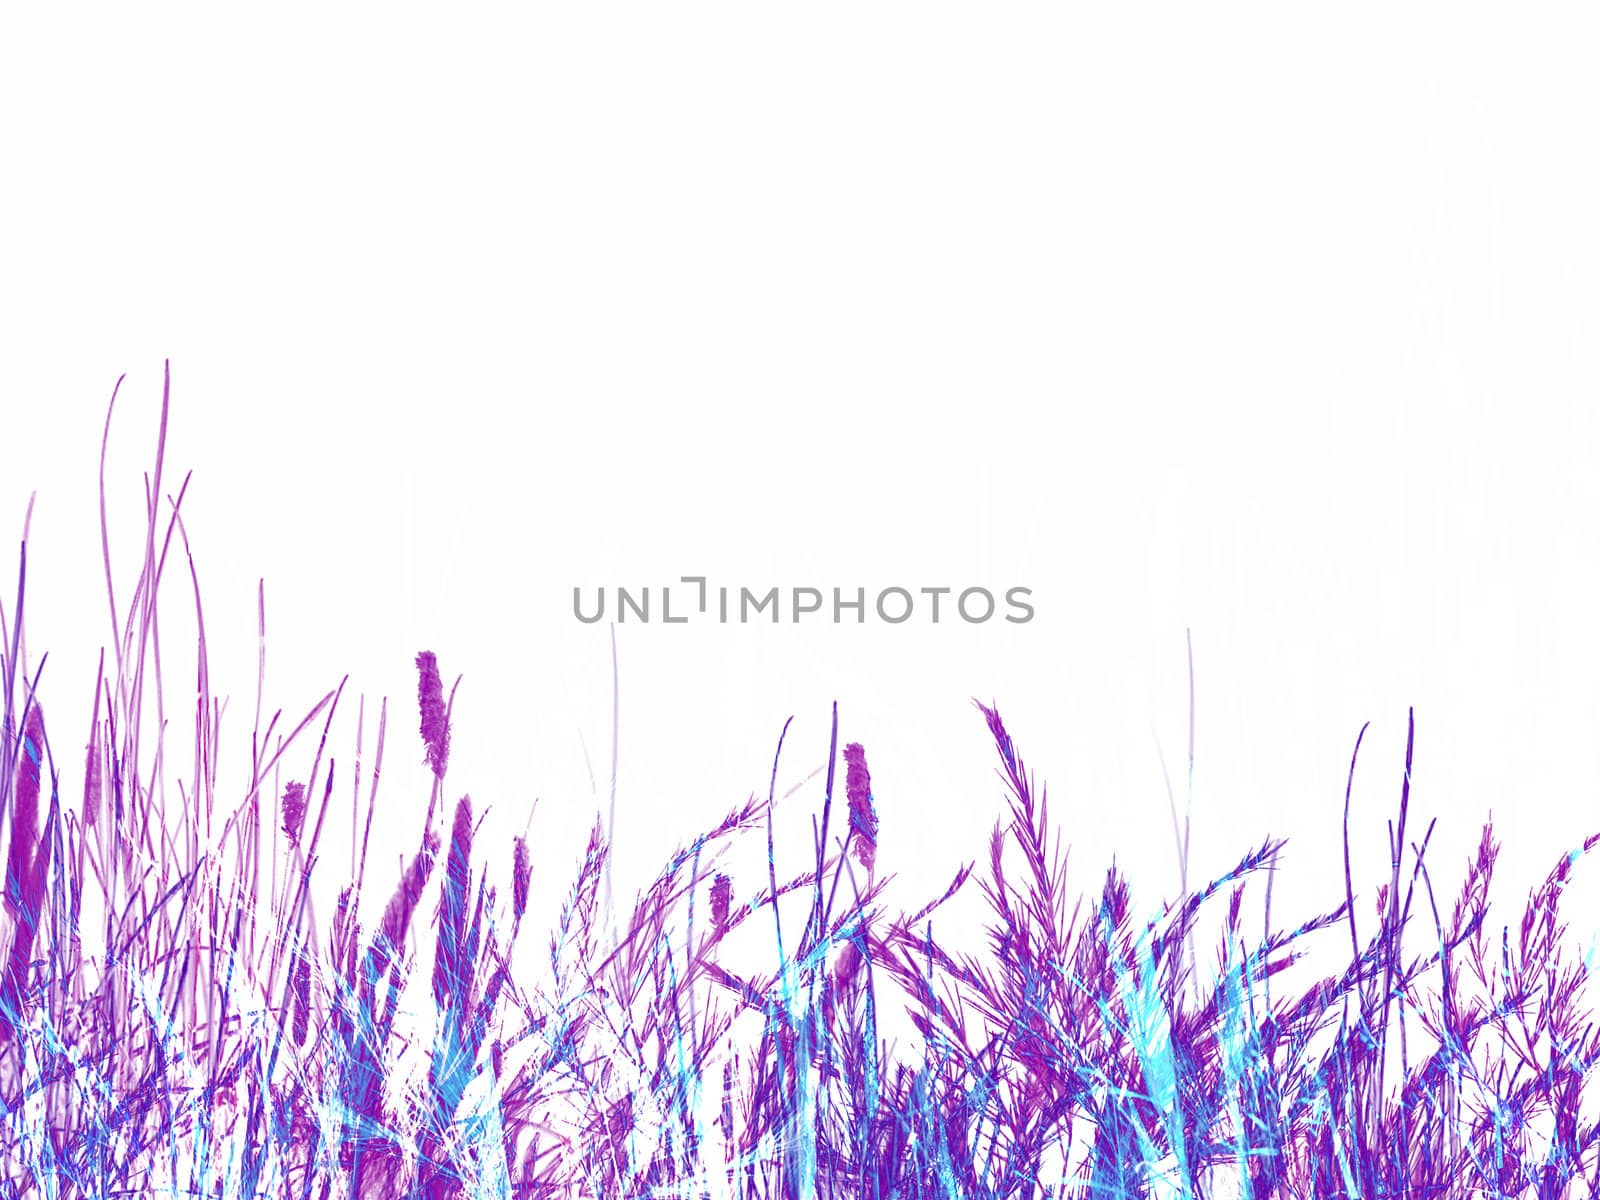 Lilac Purple Grass and Reed Illustration by bobbigmac